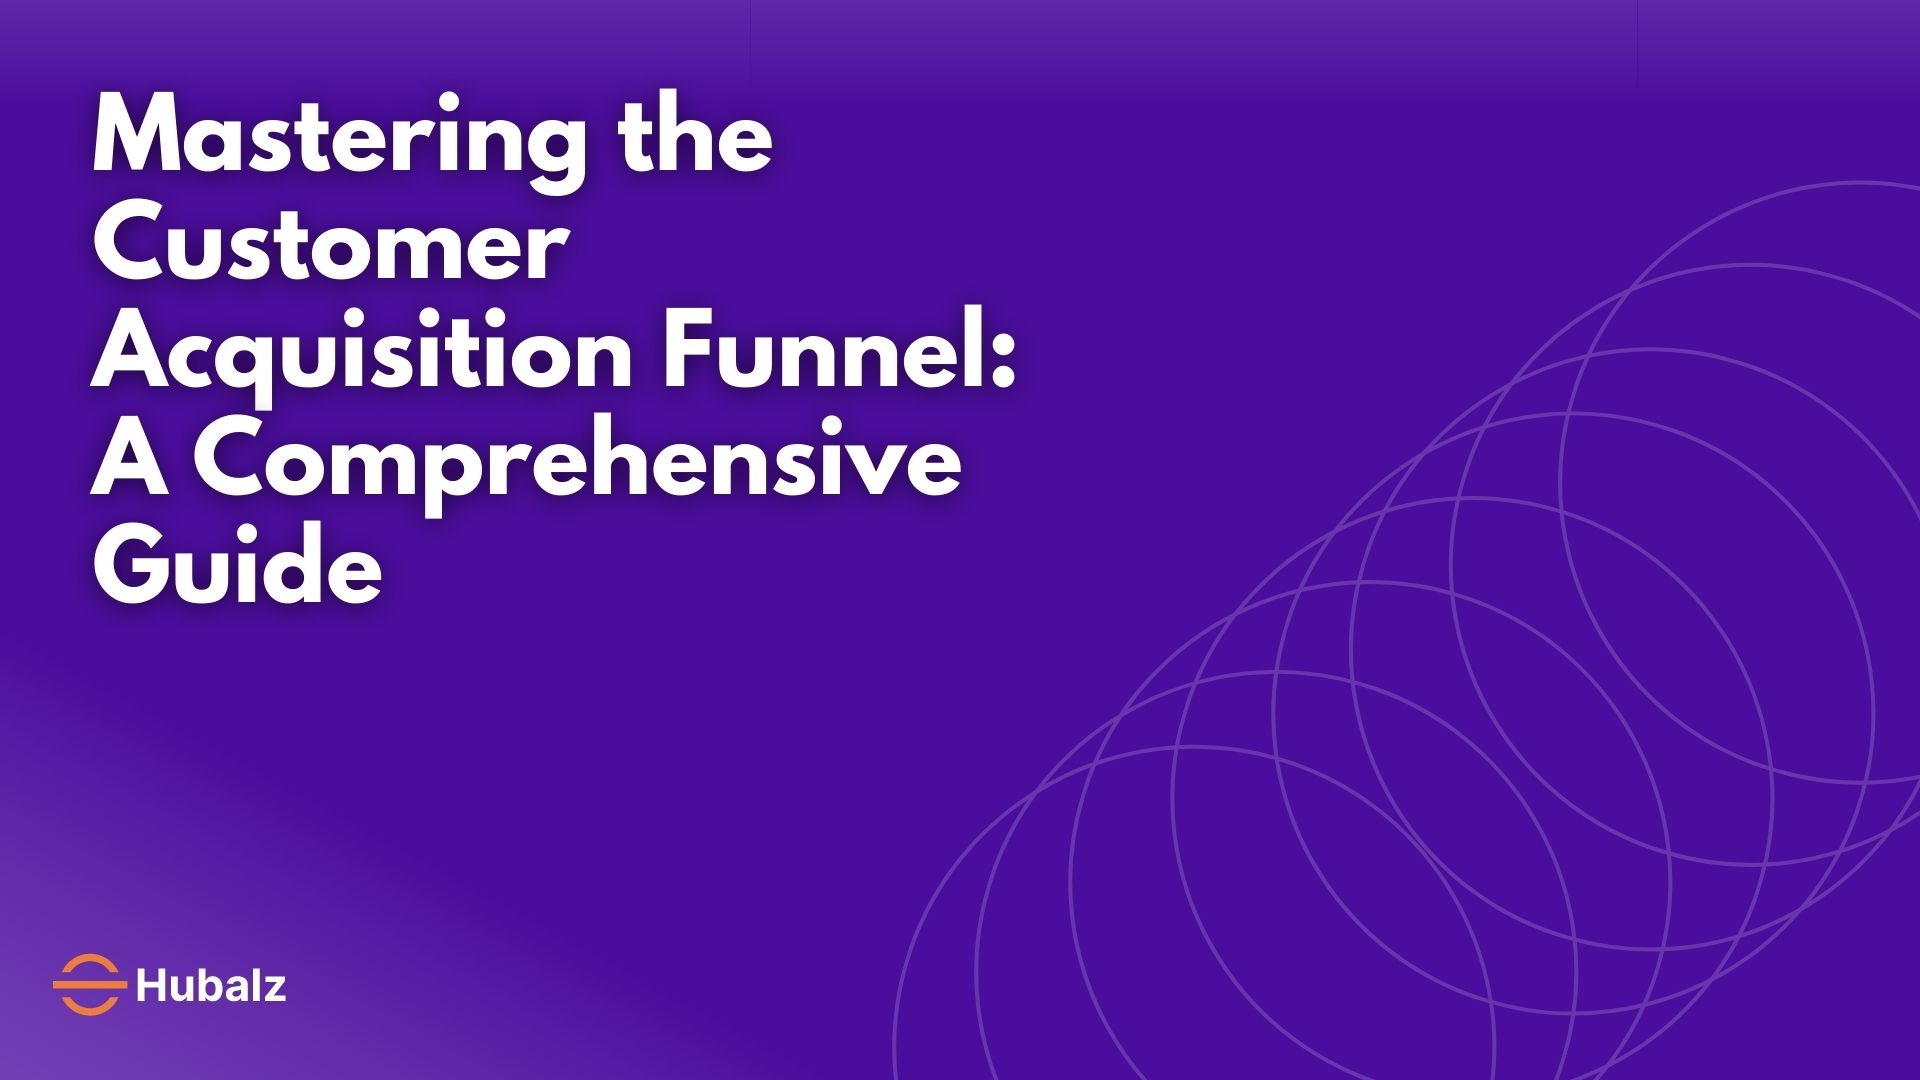 Mastering the Customer Acquisition Funnel: A Comprehensive Guide